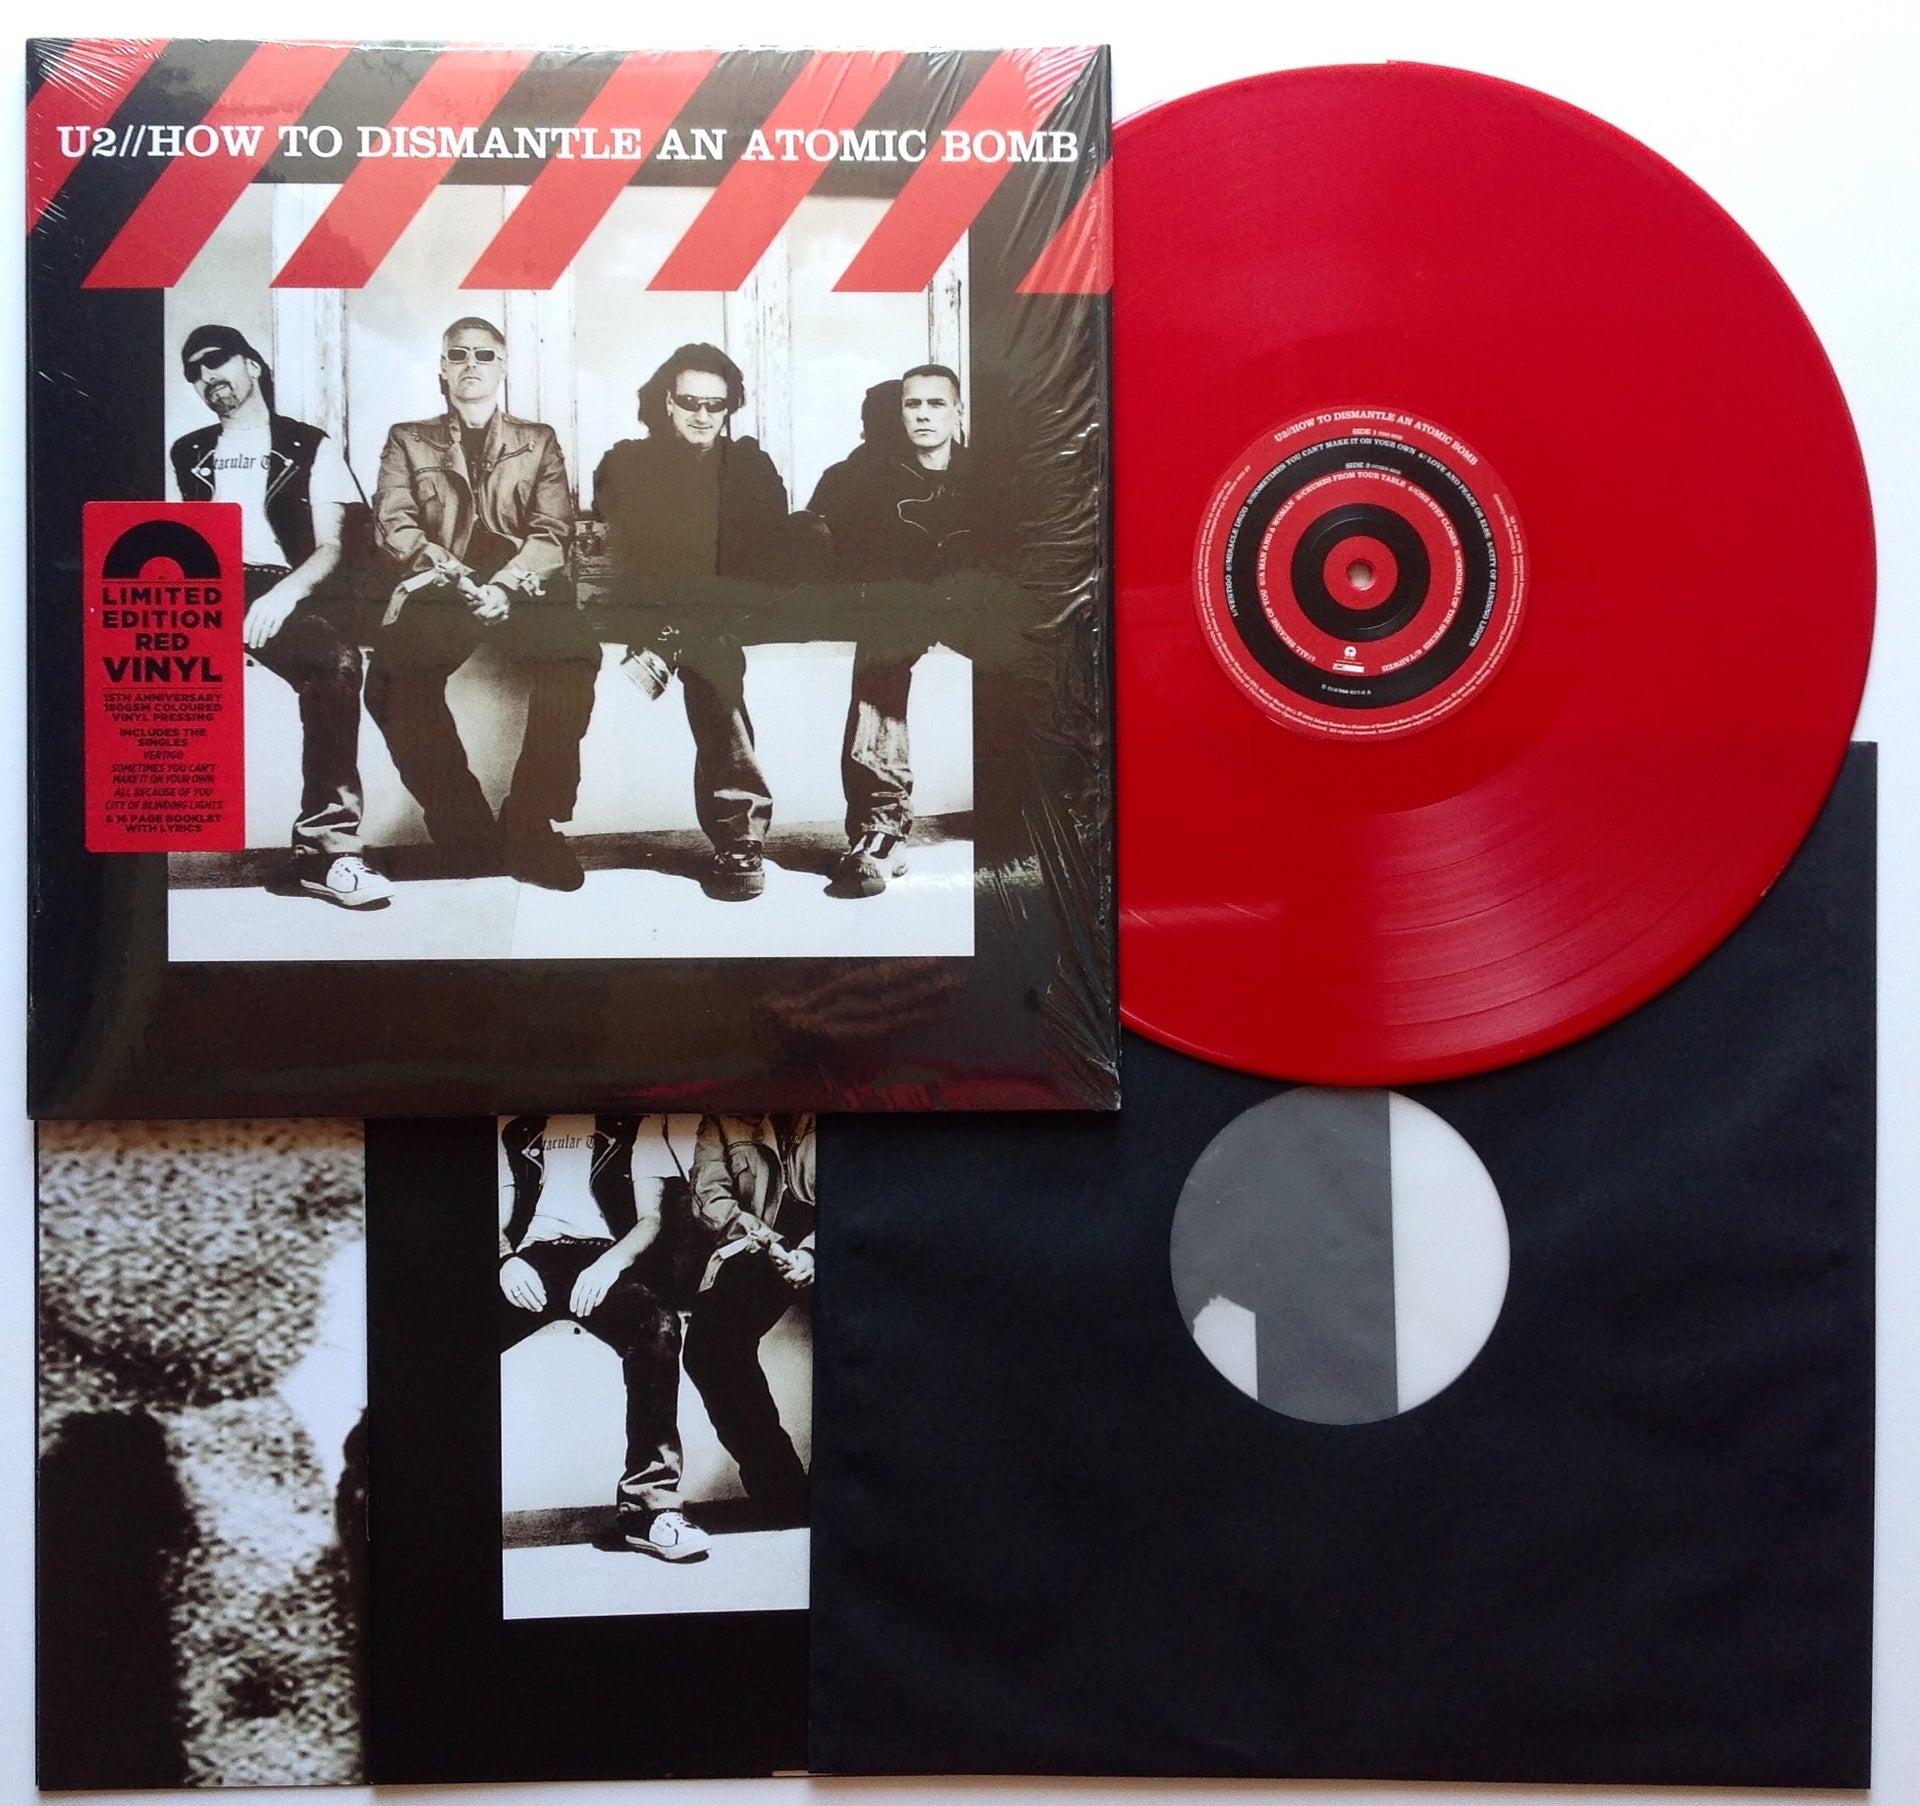 U2: How To Dismatle An Atomic Bomb Vinyl LP (Red)